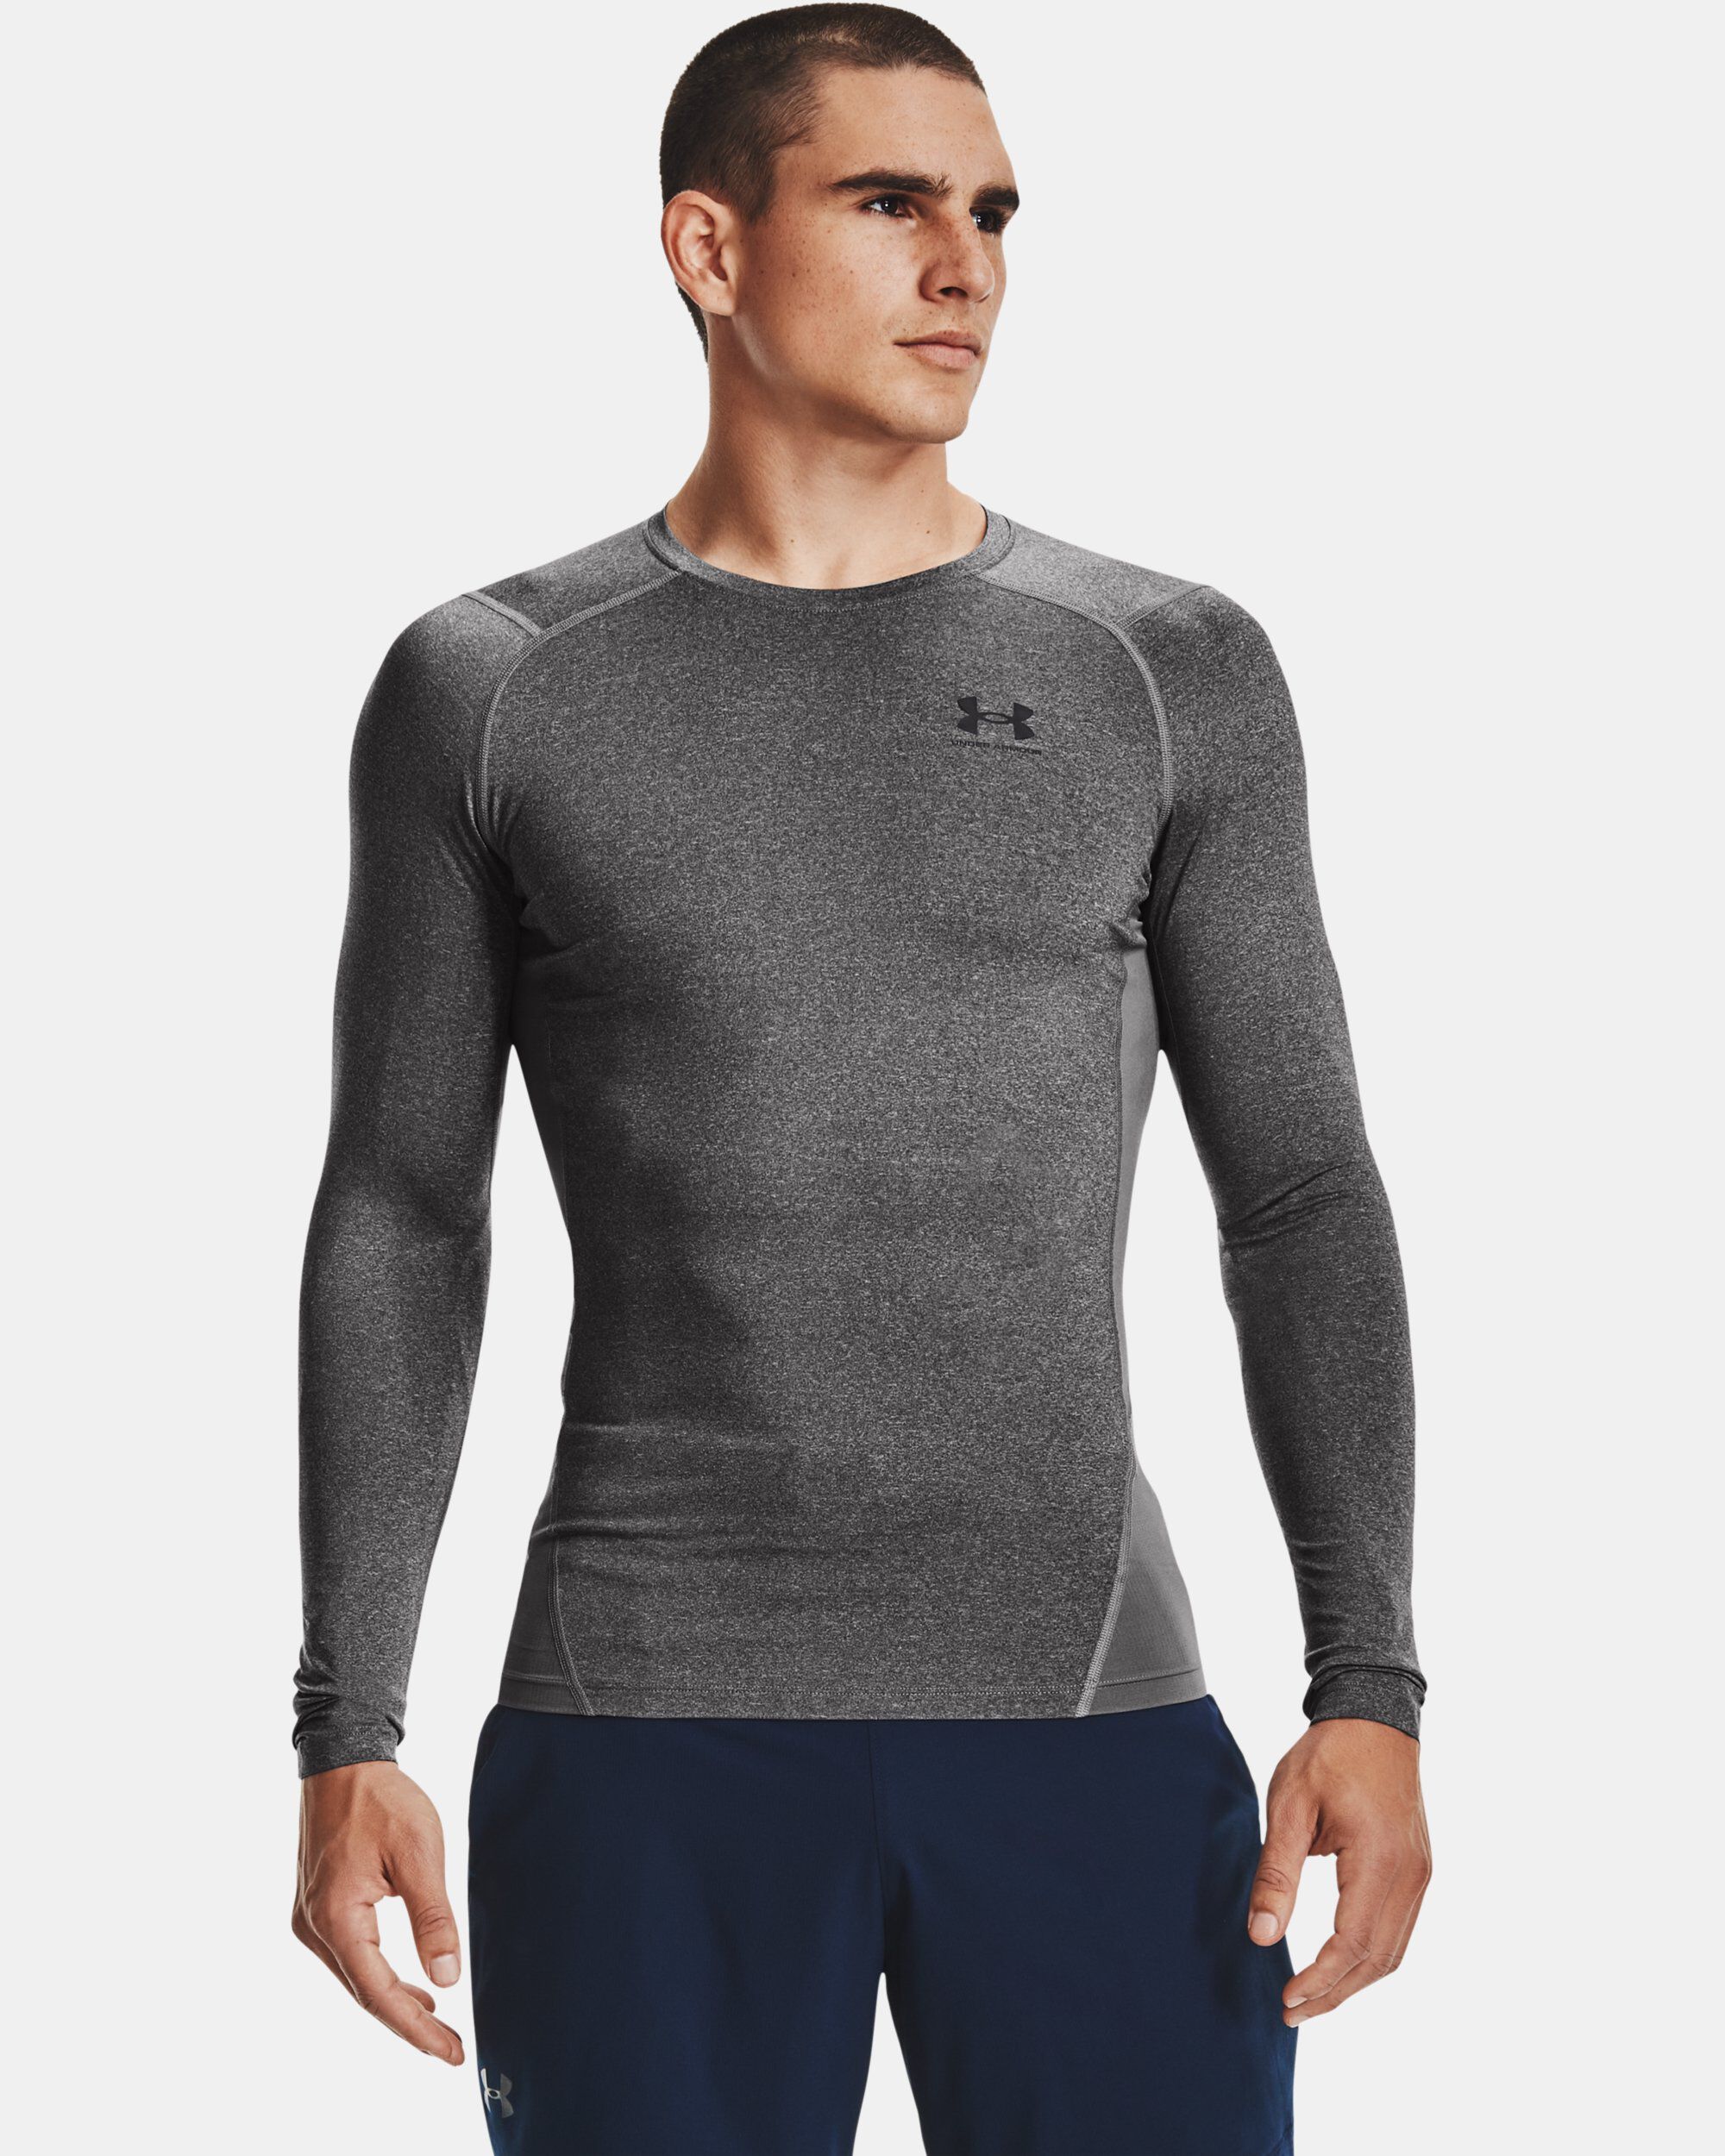 Buy Under Armour Men's HeatGear® CoolSwitch Compression Long Sleeve T-Shirt  White in Dubai, UAE -SSS